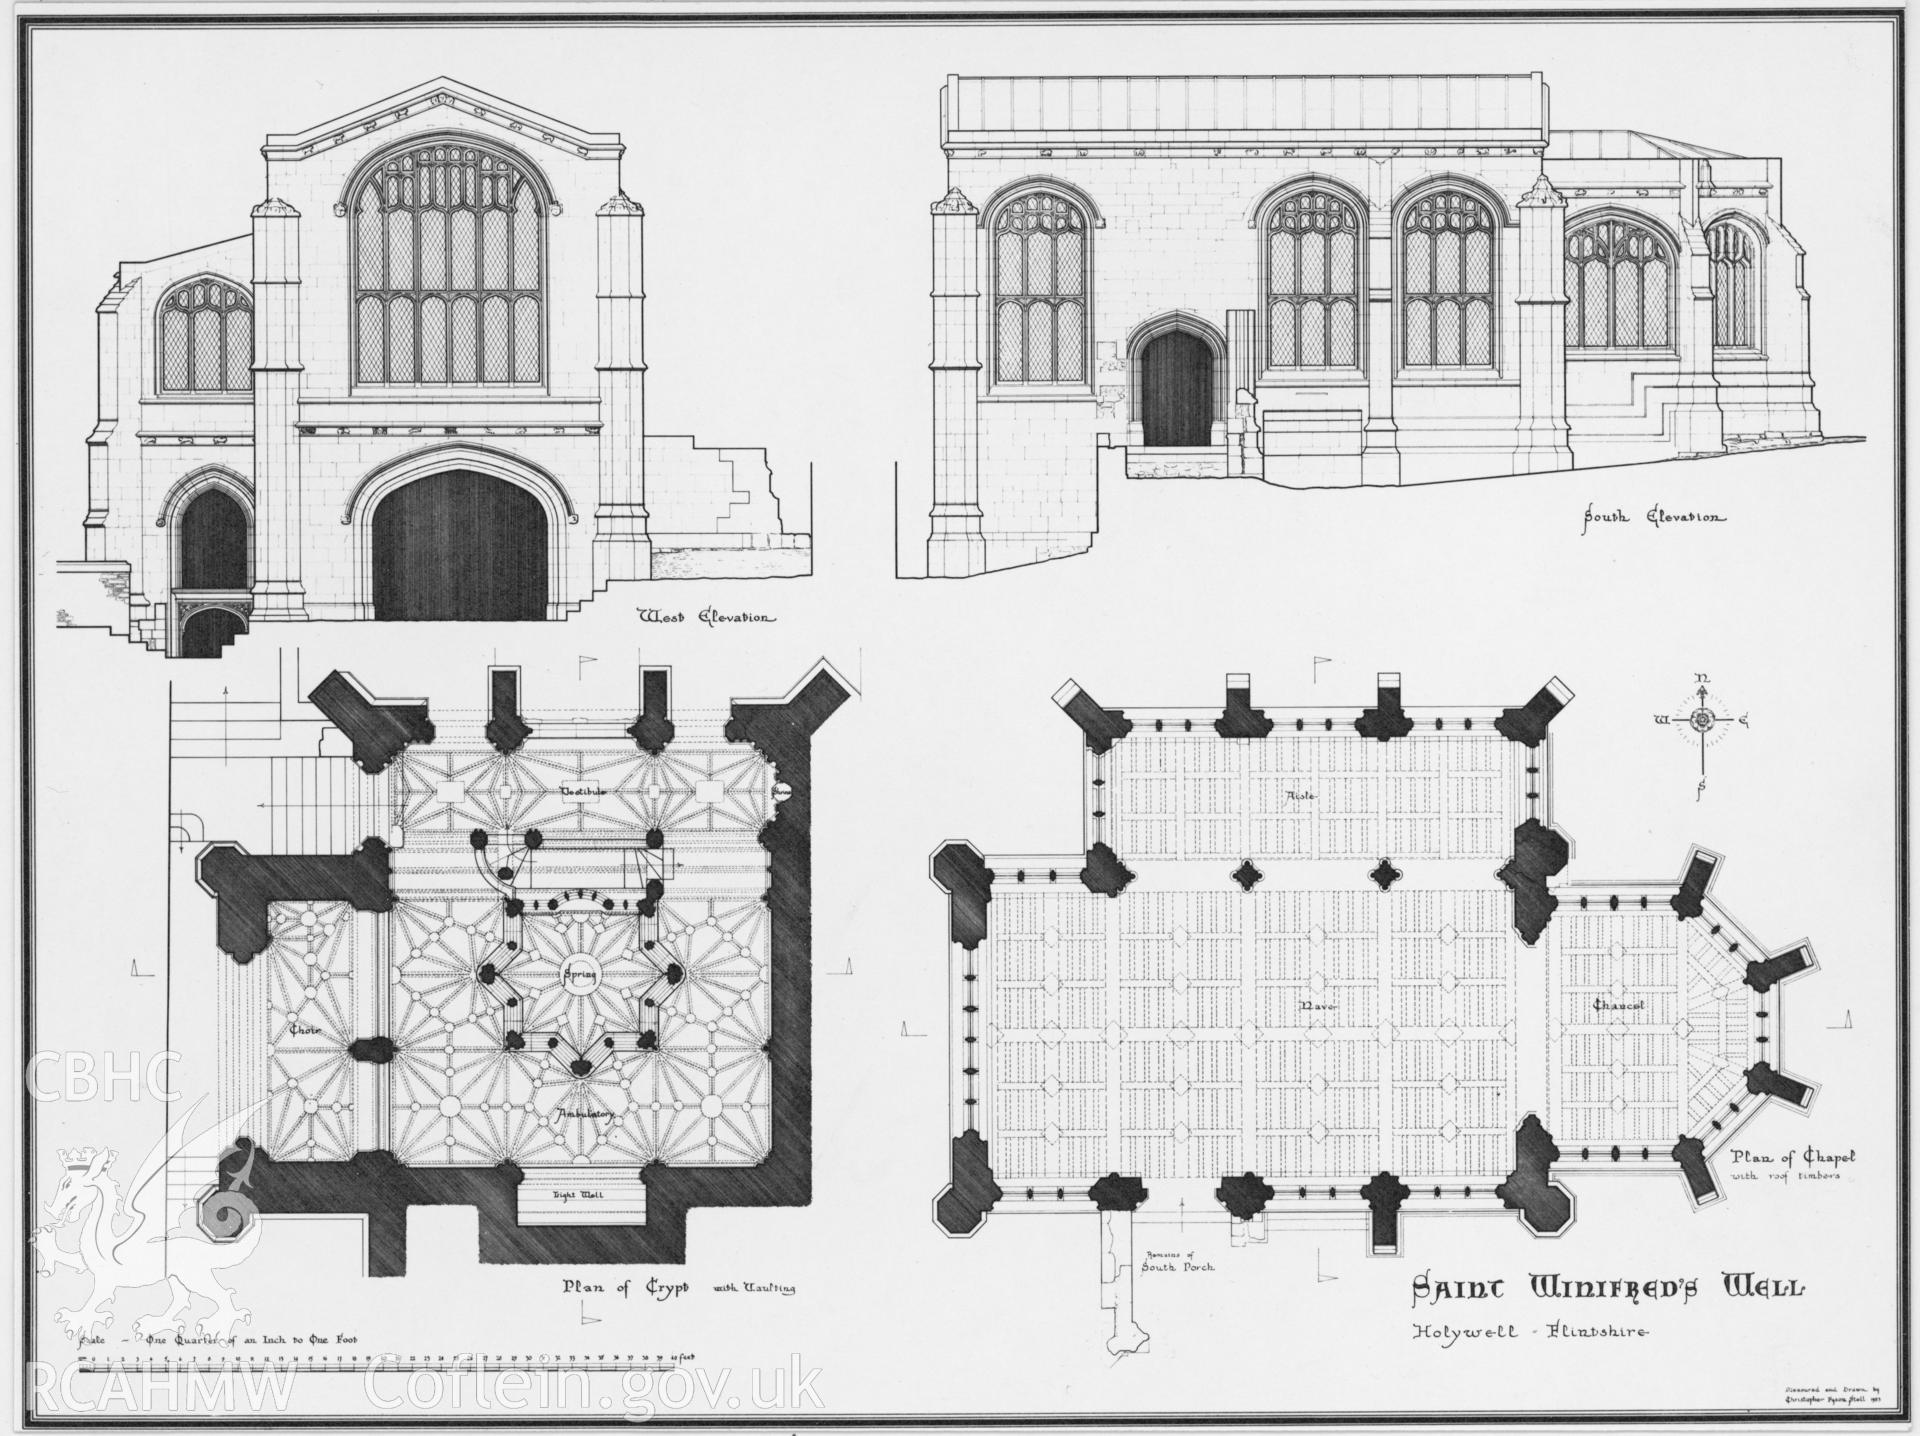 Digital copy of plan and elevation drawing of St Winifrede's Well.